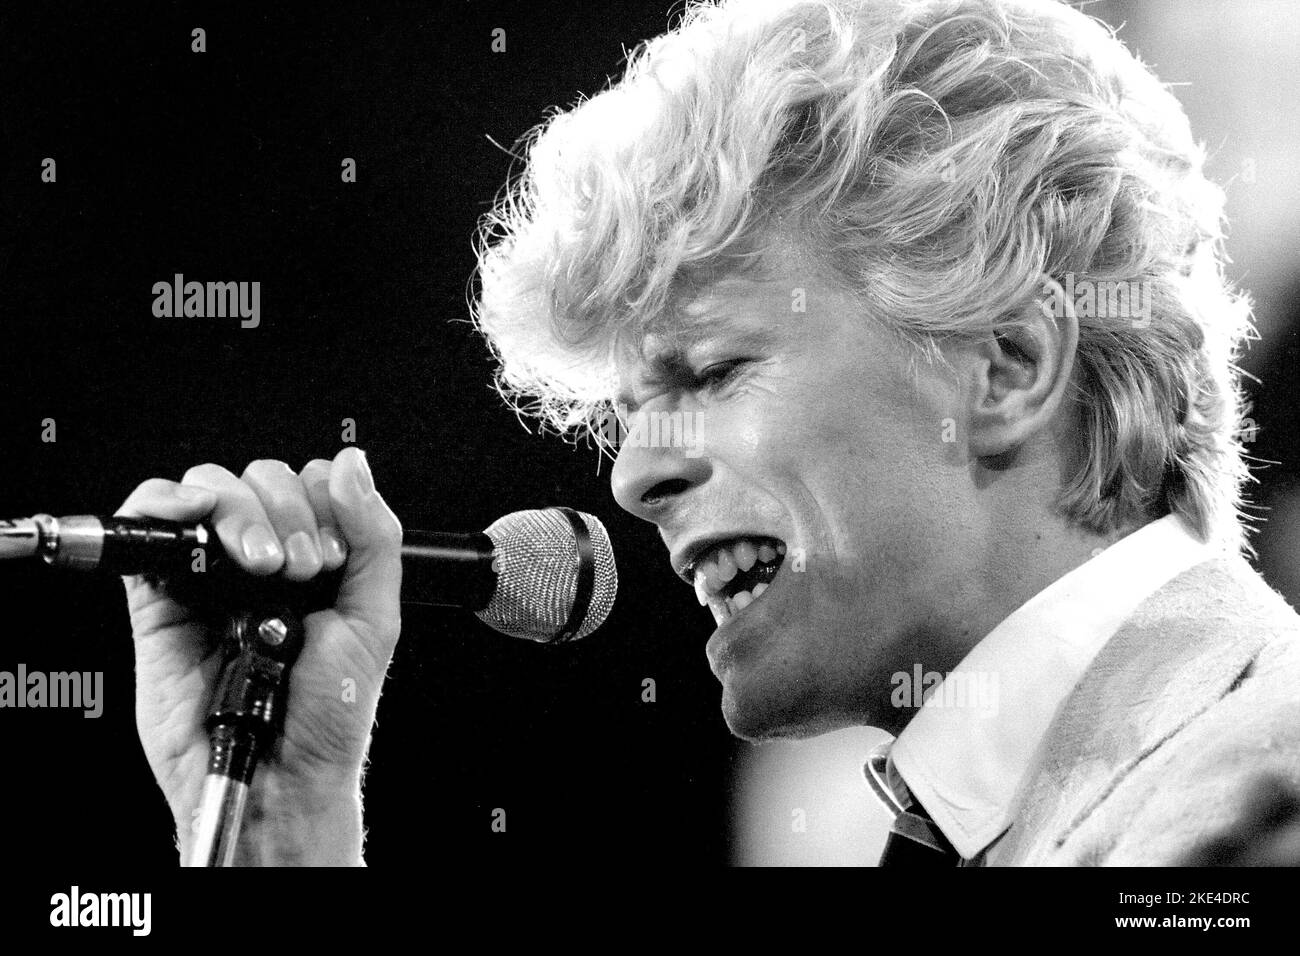 David Bowie in het Feijenoord stadion 1983. Rotterdam-Netherlands. Serious Moonlight Tour. Live on stage David Bowie.-vvbvanbree. Stock Photo